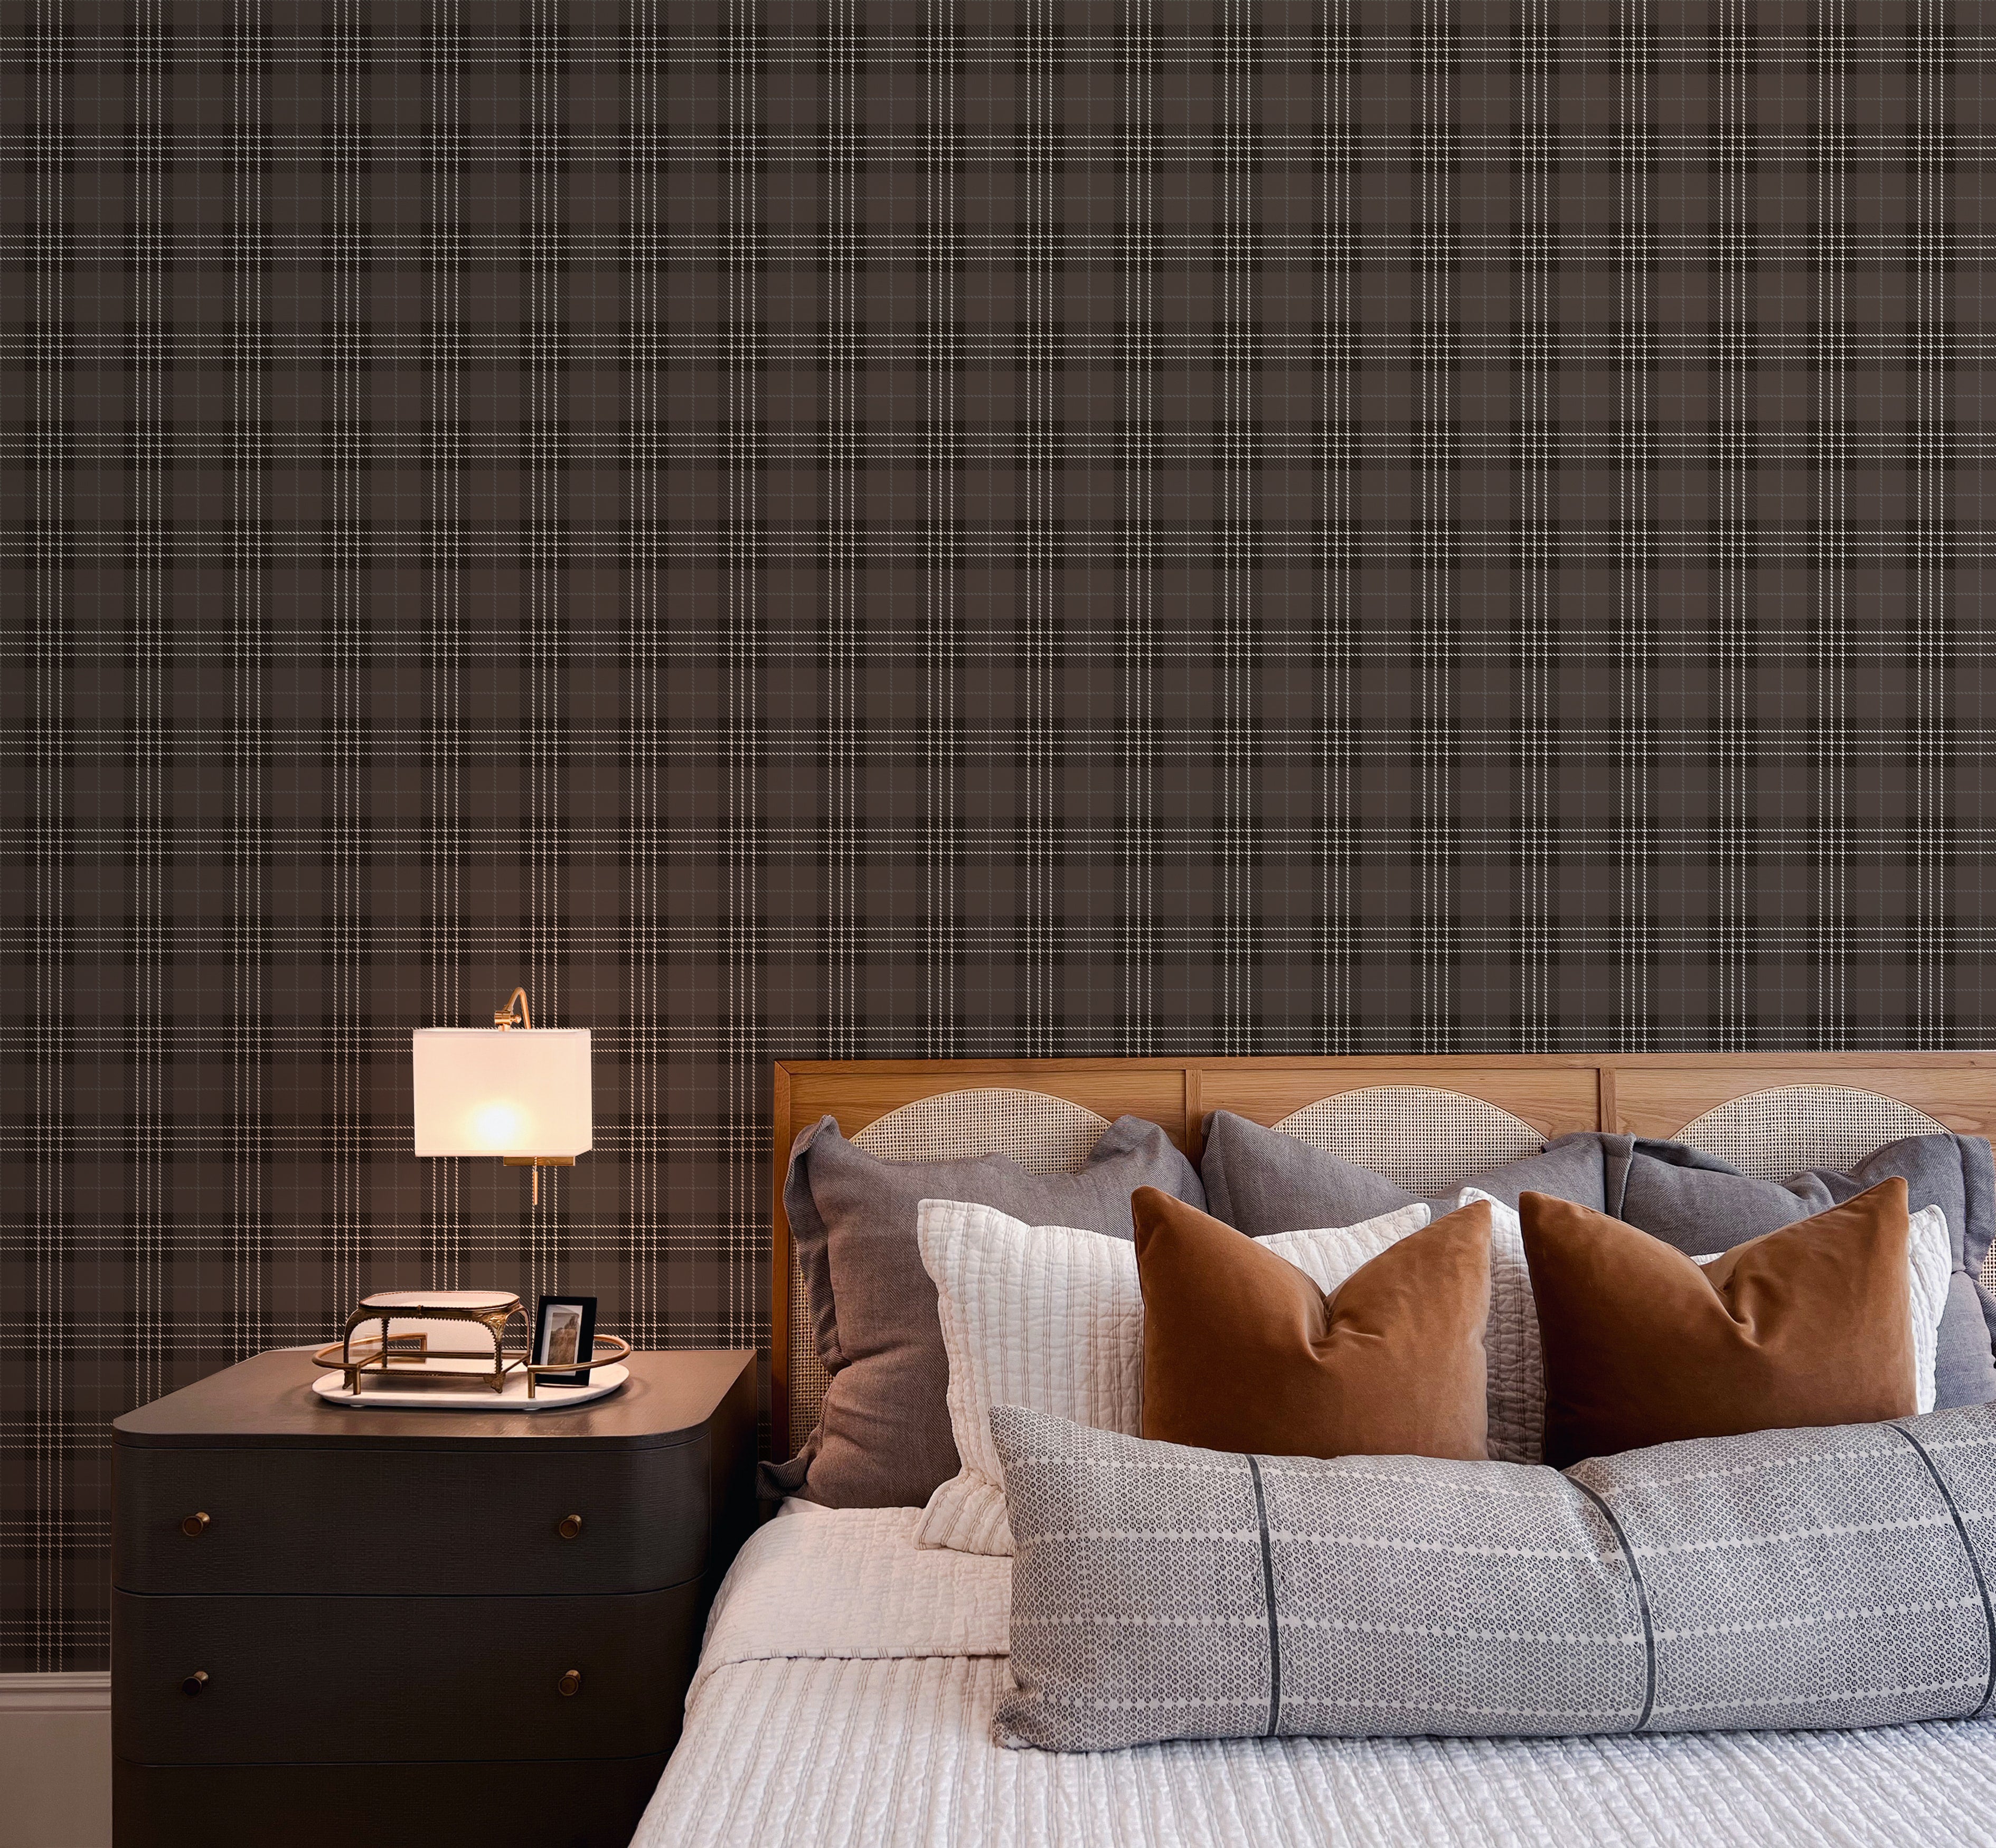 A luxurious bedroom accentuated by Dark Plaid Wallpaper - Black, providing a rich, textured backdrop to a bed with assorted pillows. The pattern adds depth and a traditional touch to the modern room, complemented by a sleek bedside table and a contemporary lamp.